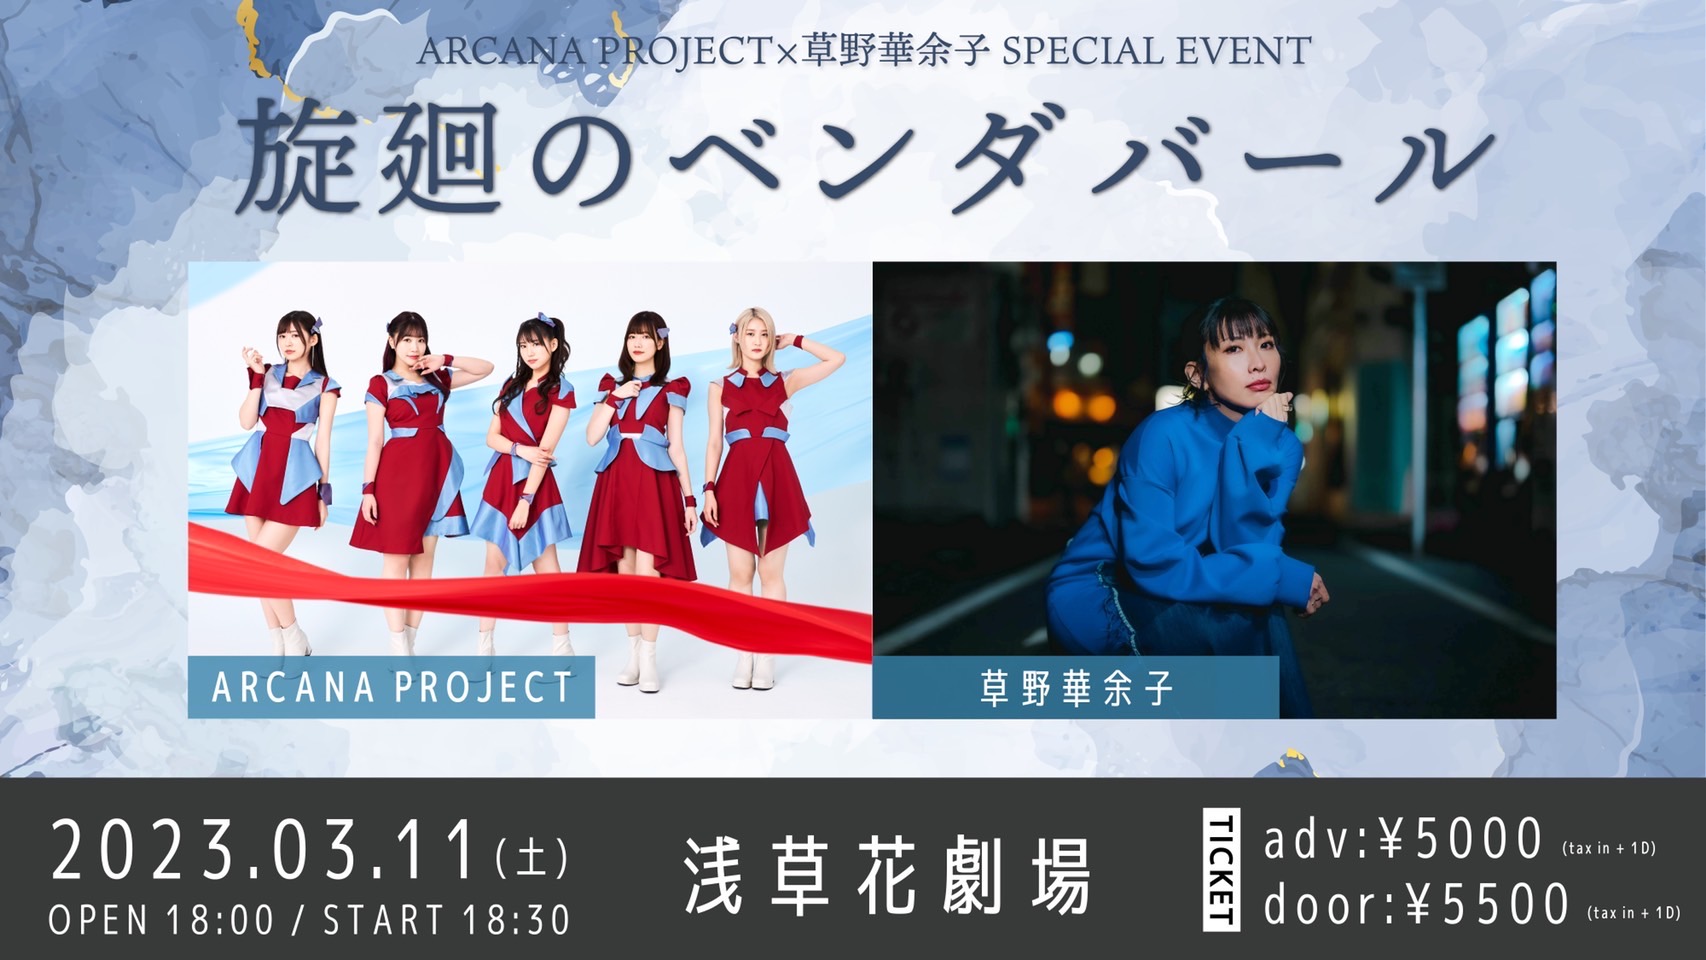 ARCANA PROJECT×草野華余子 SPECIAL EVENT「旋廻のベンダバール」